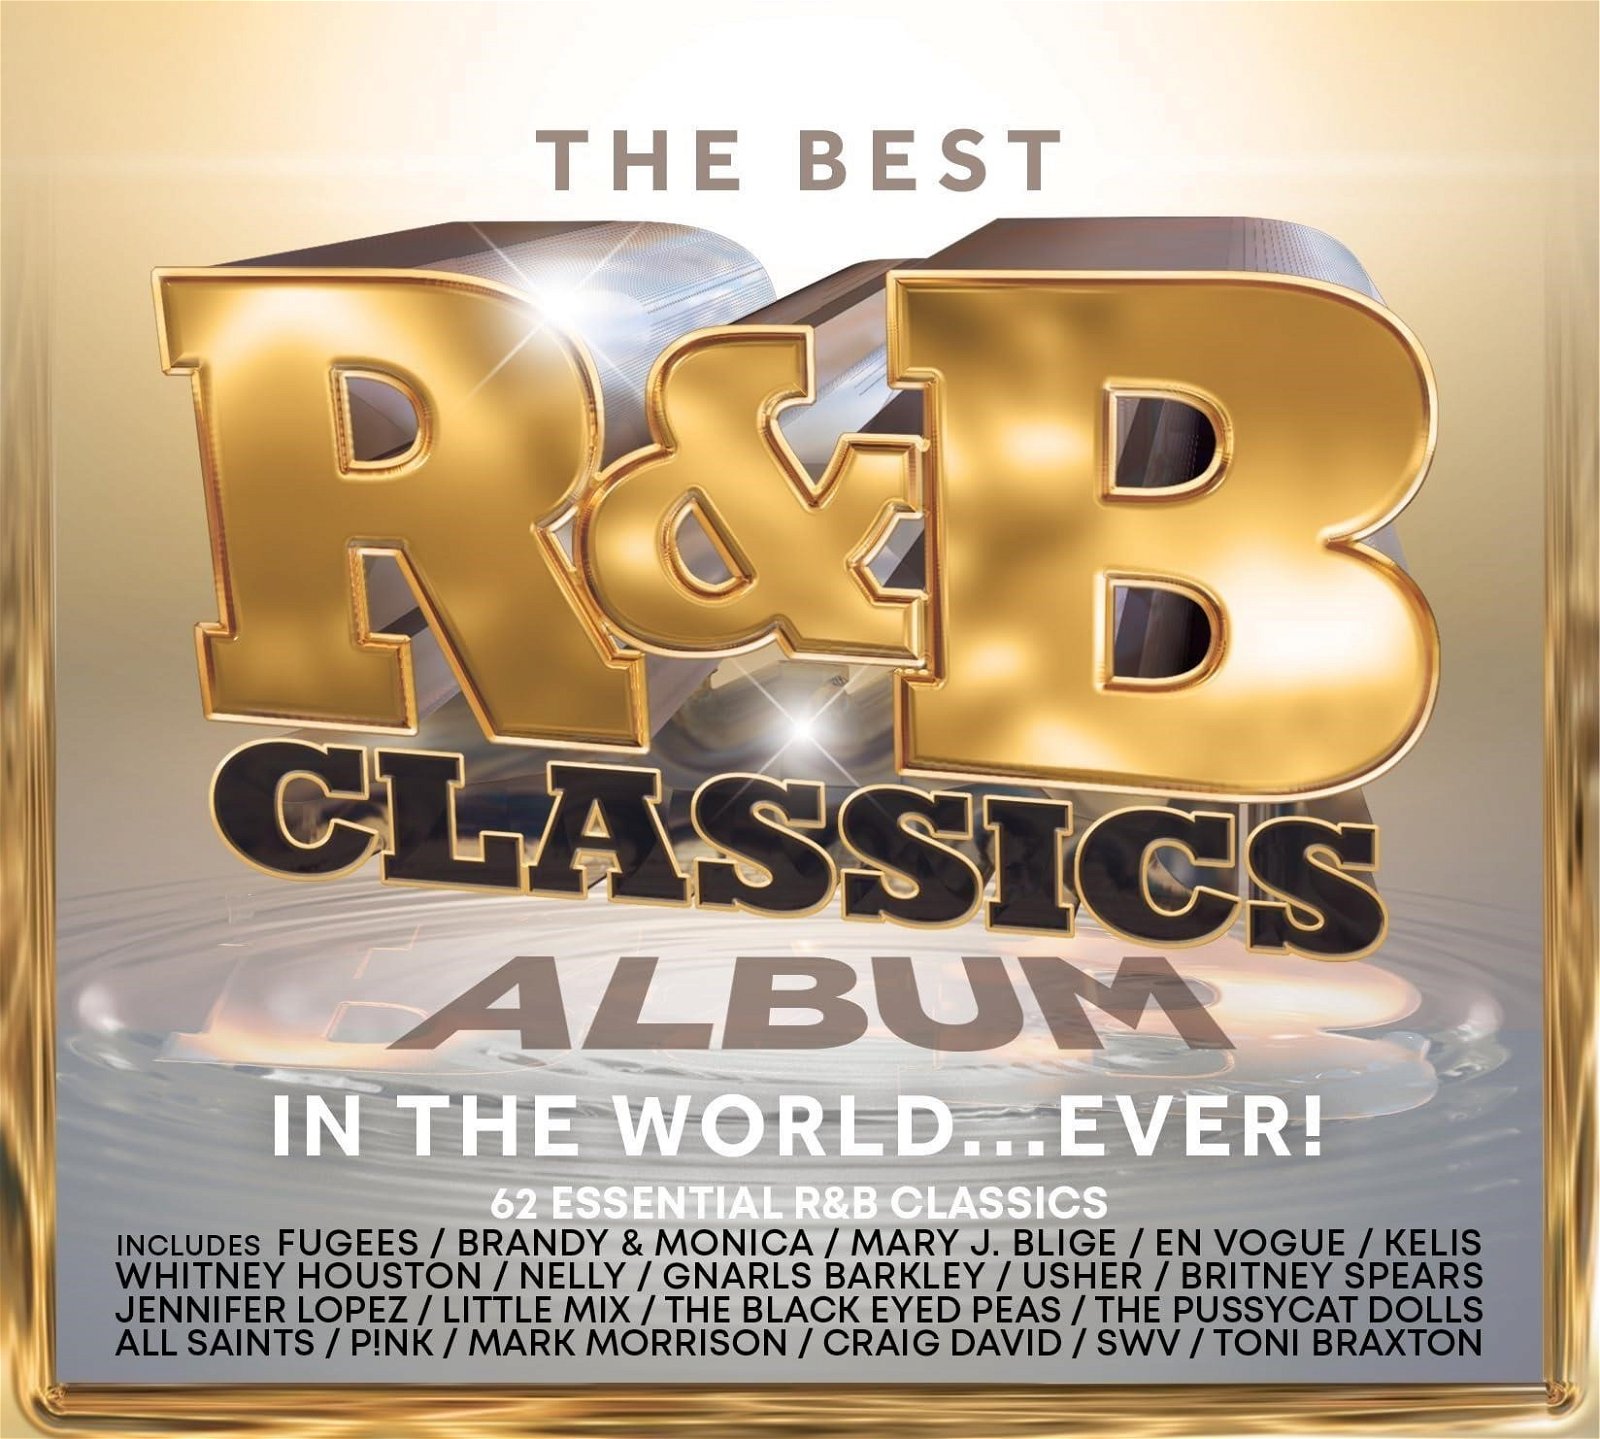 CD Shop - V/A THE BEST R&B CLASSICS ALBUM IN THE WORLD EVER!